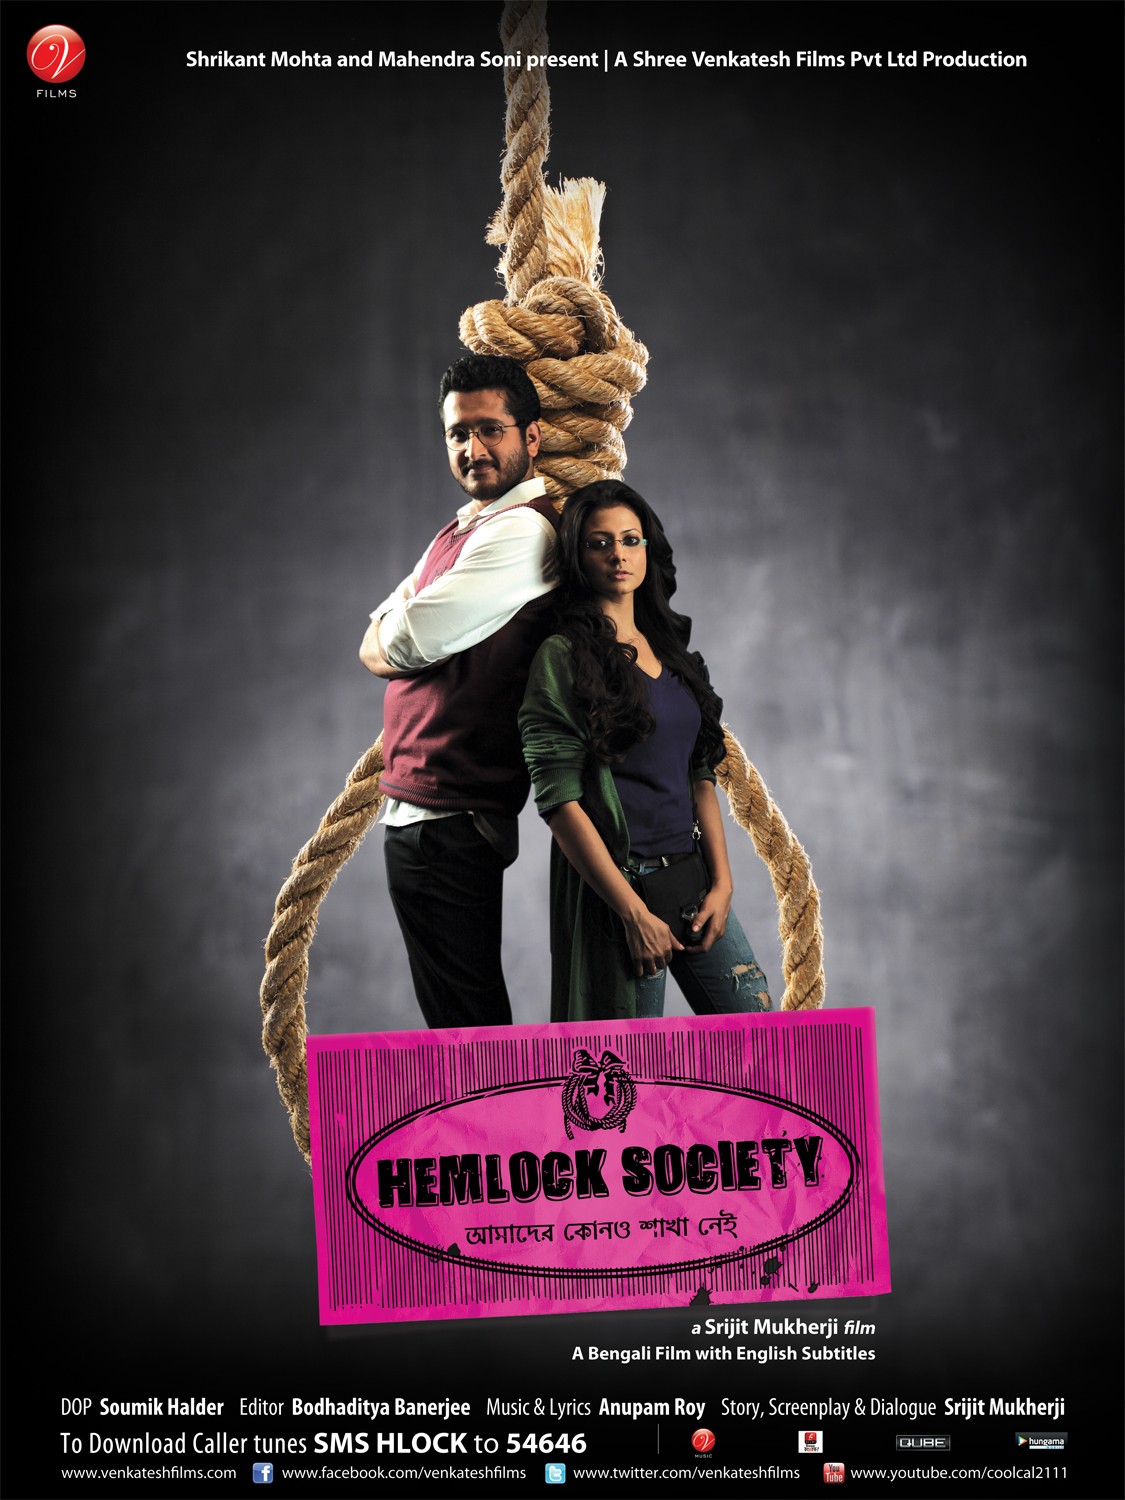 Extra Large Movie Poster Image for Hemlock Society (#6 of 10)